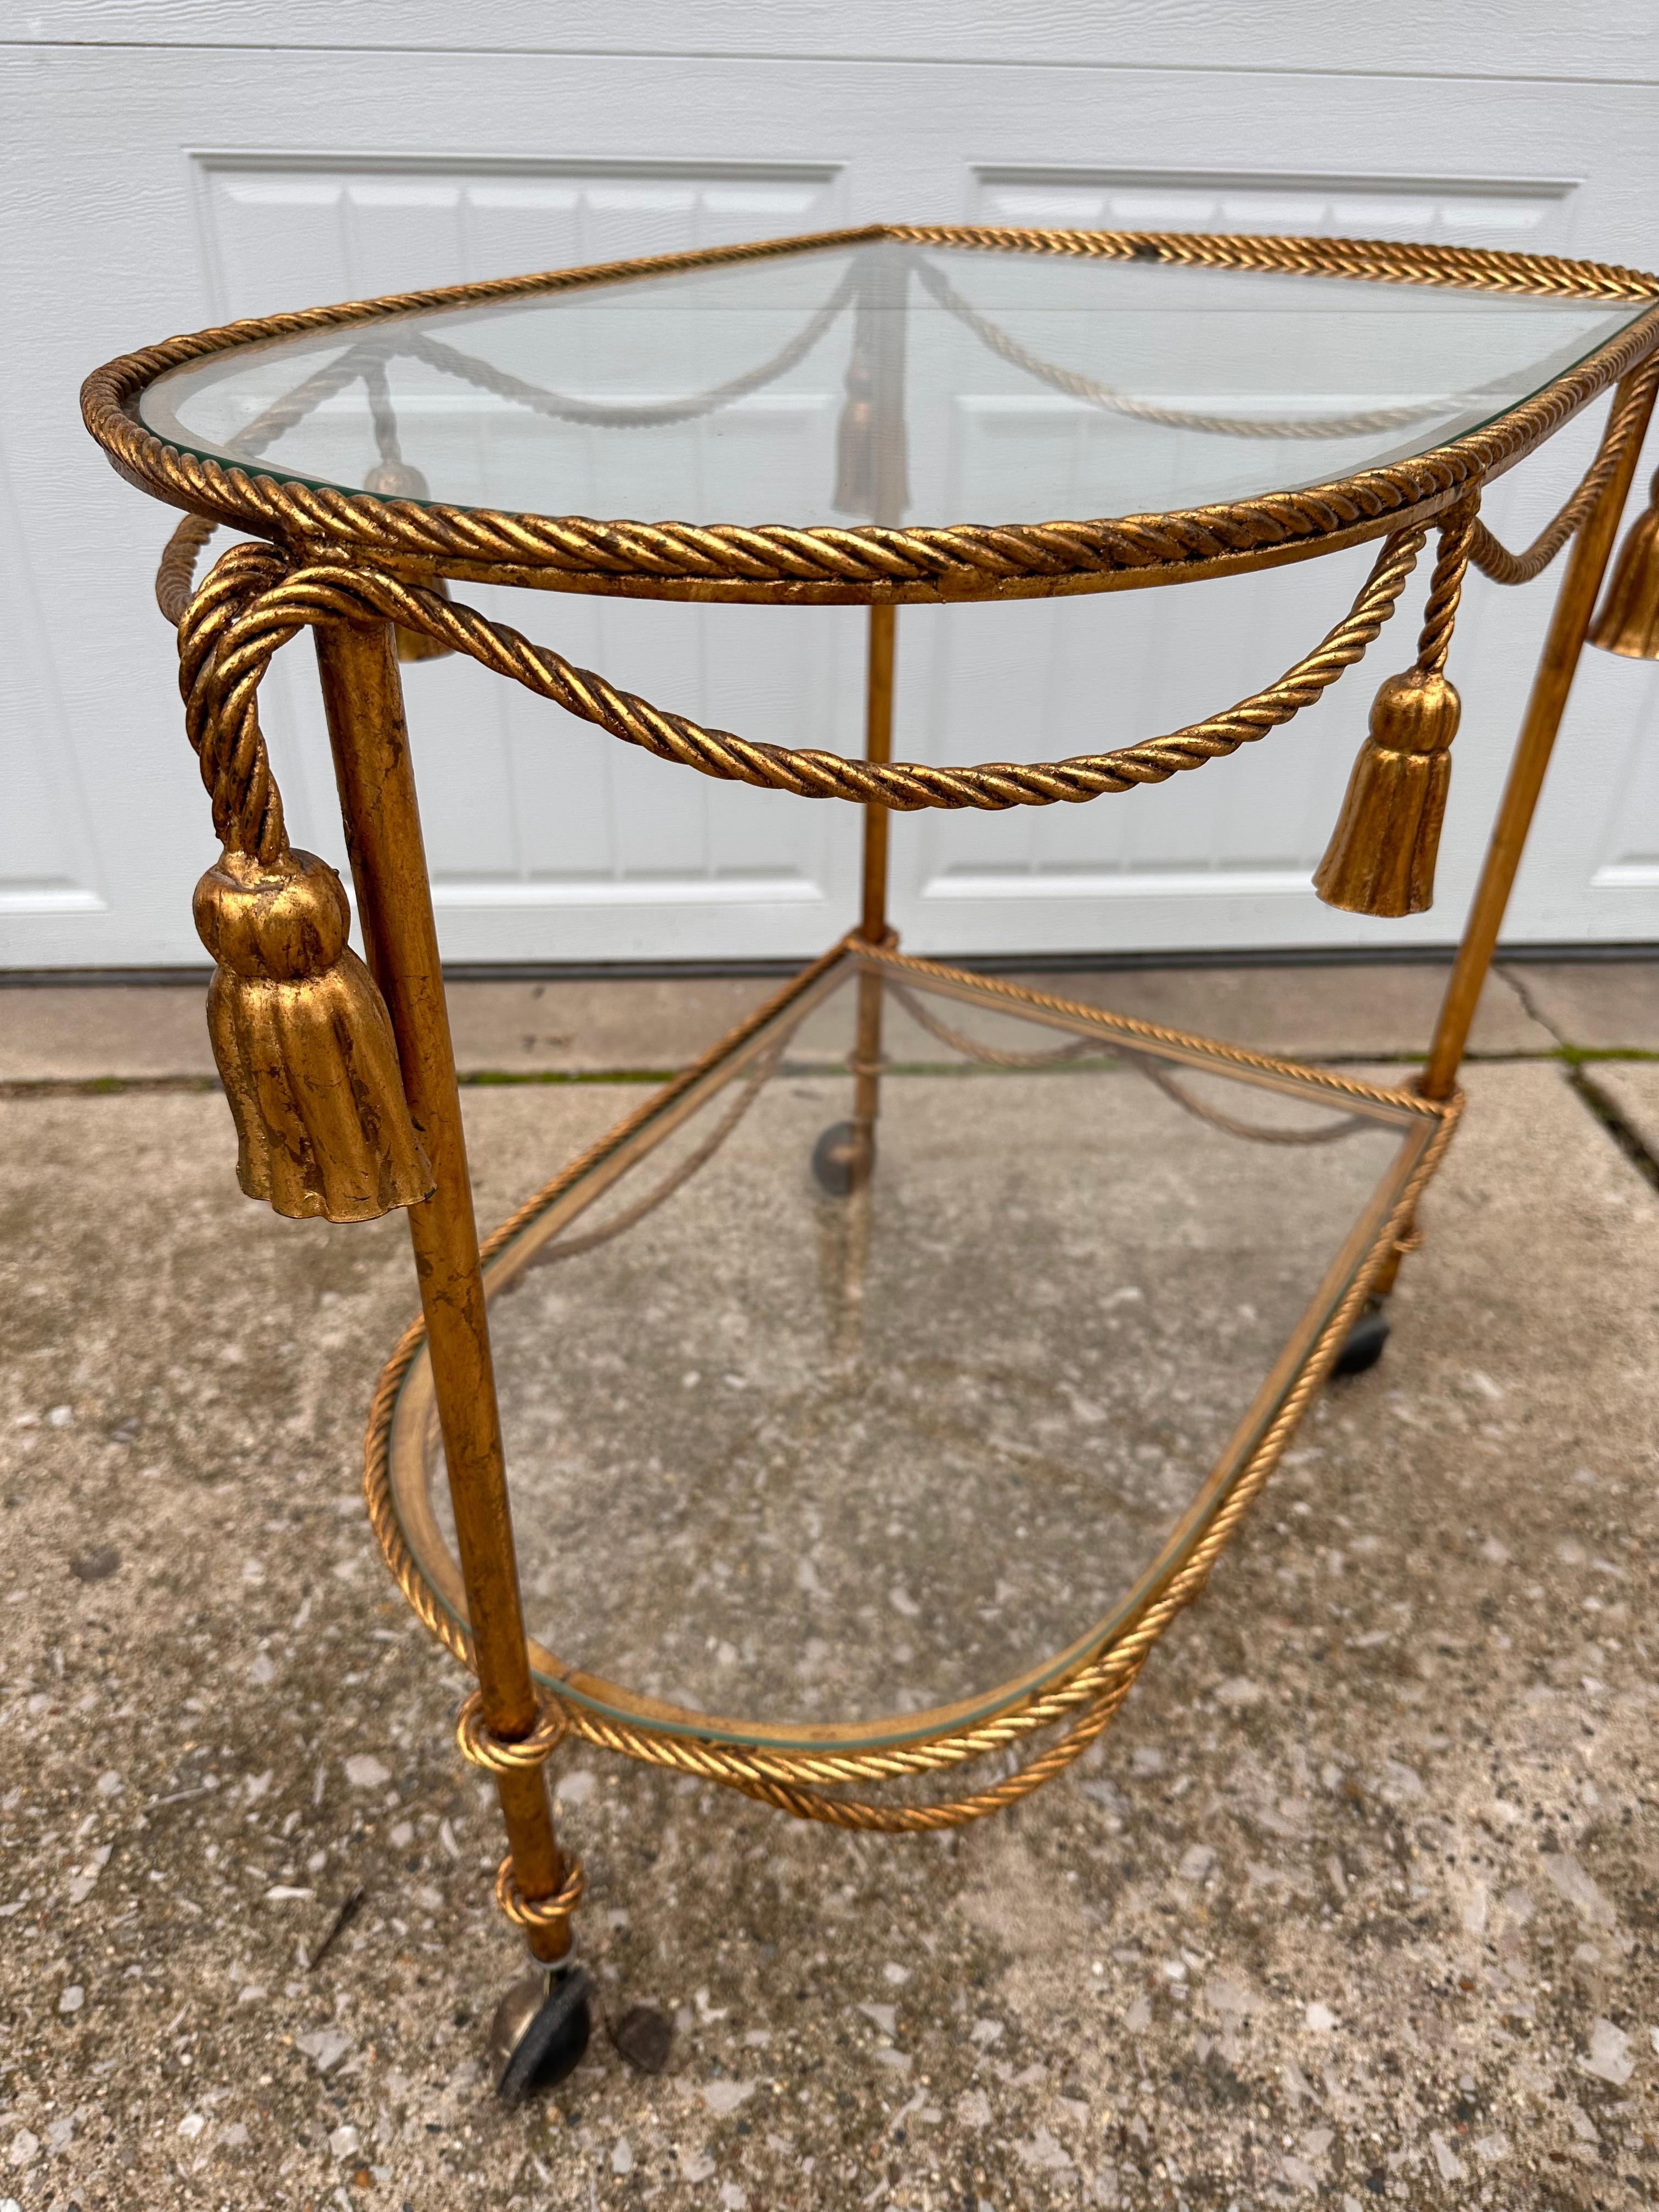 Metal 1950s Italian Gilded Two Tiered Bar Cart Hollywood Regency Style with Tassels